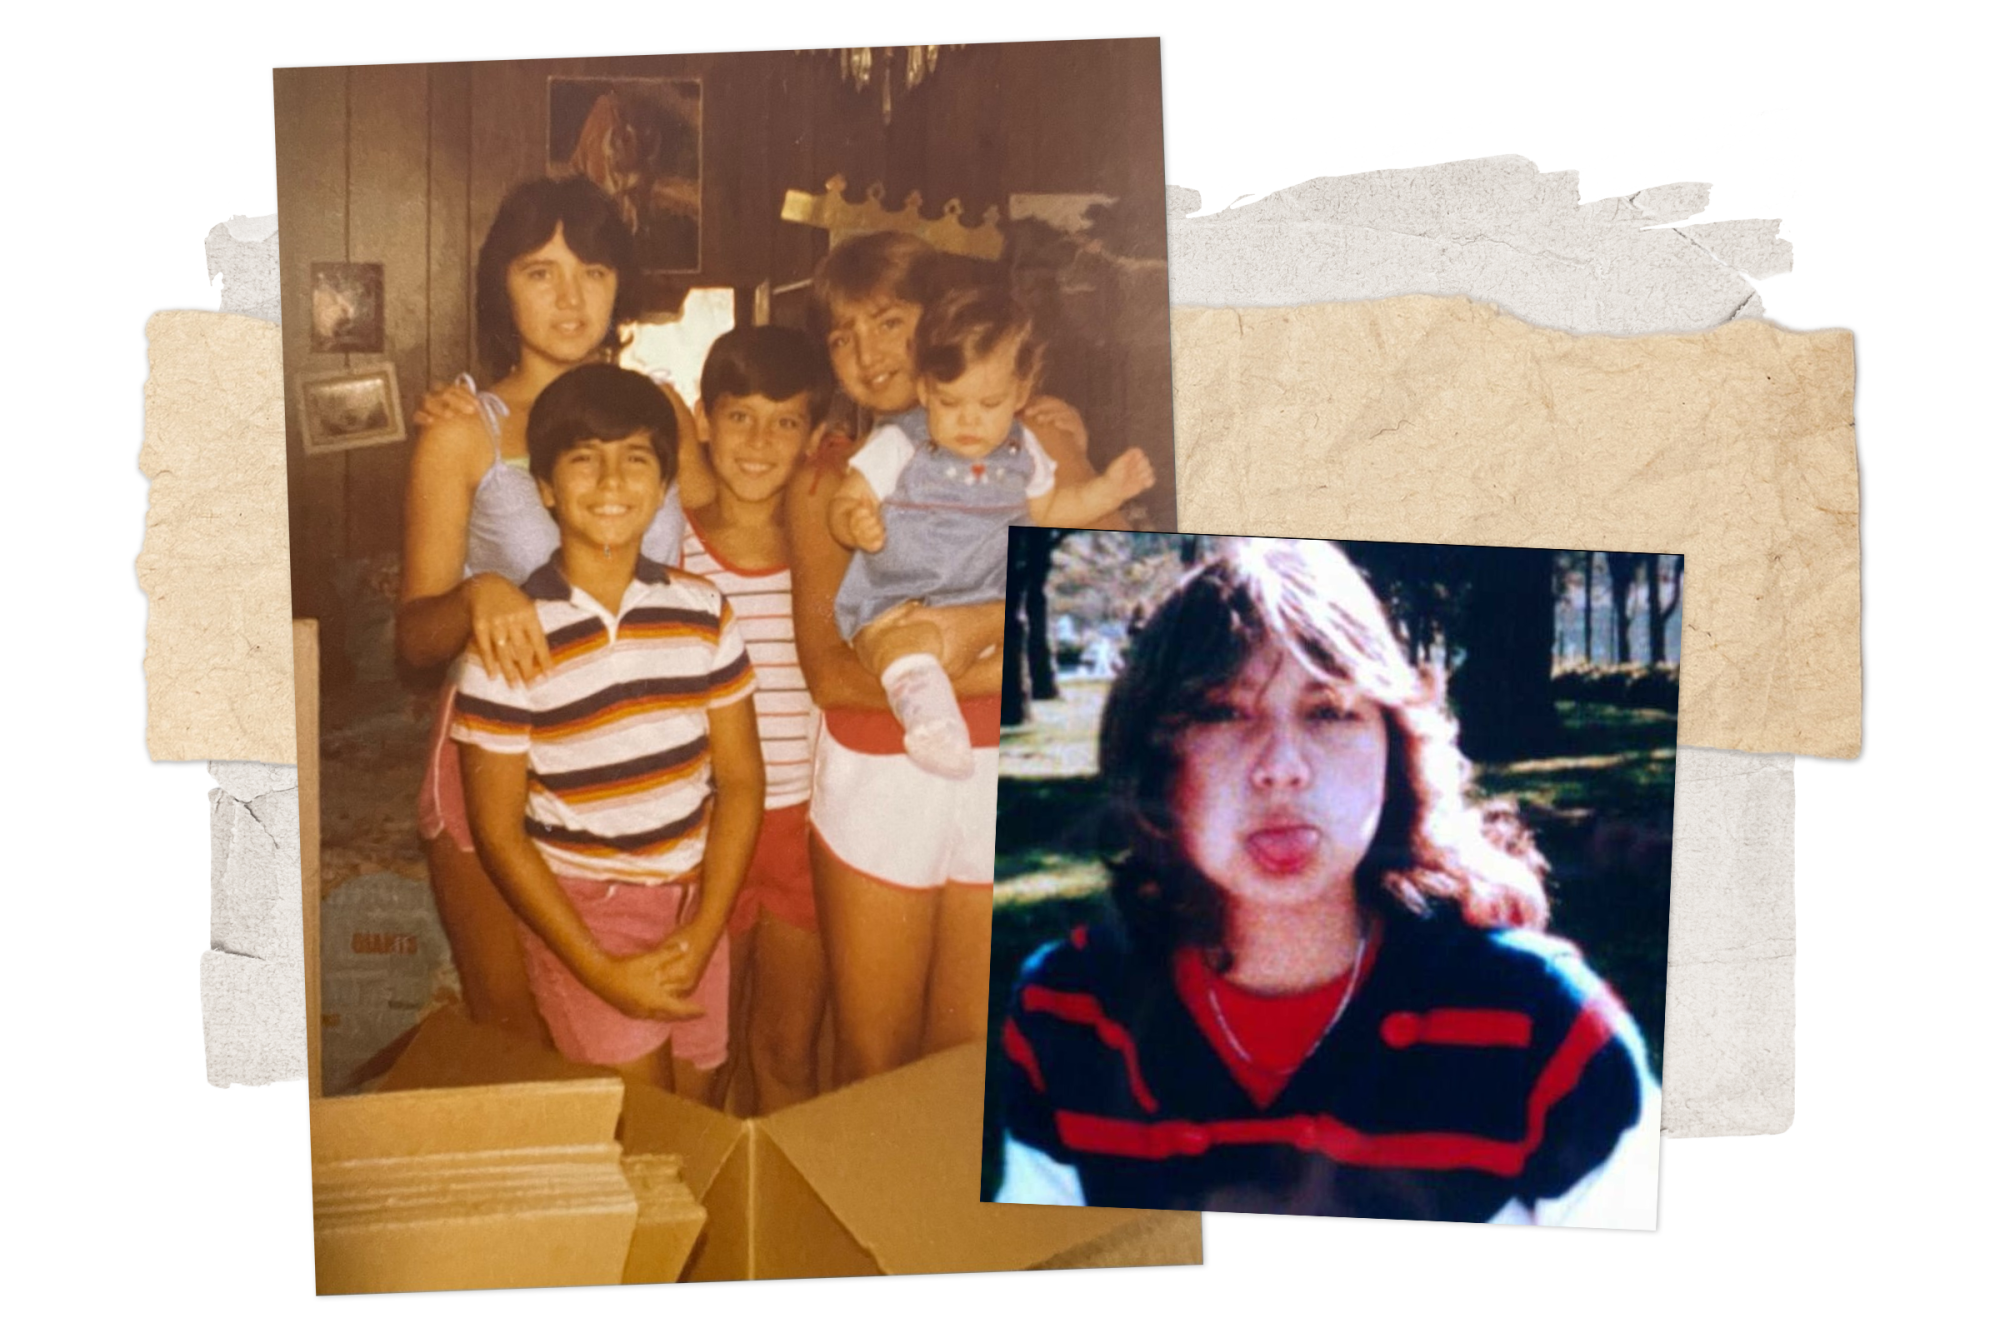 collage of a teen girl sticking out her tongue and a family photo of five kids ranging in age from toddler to teen.